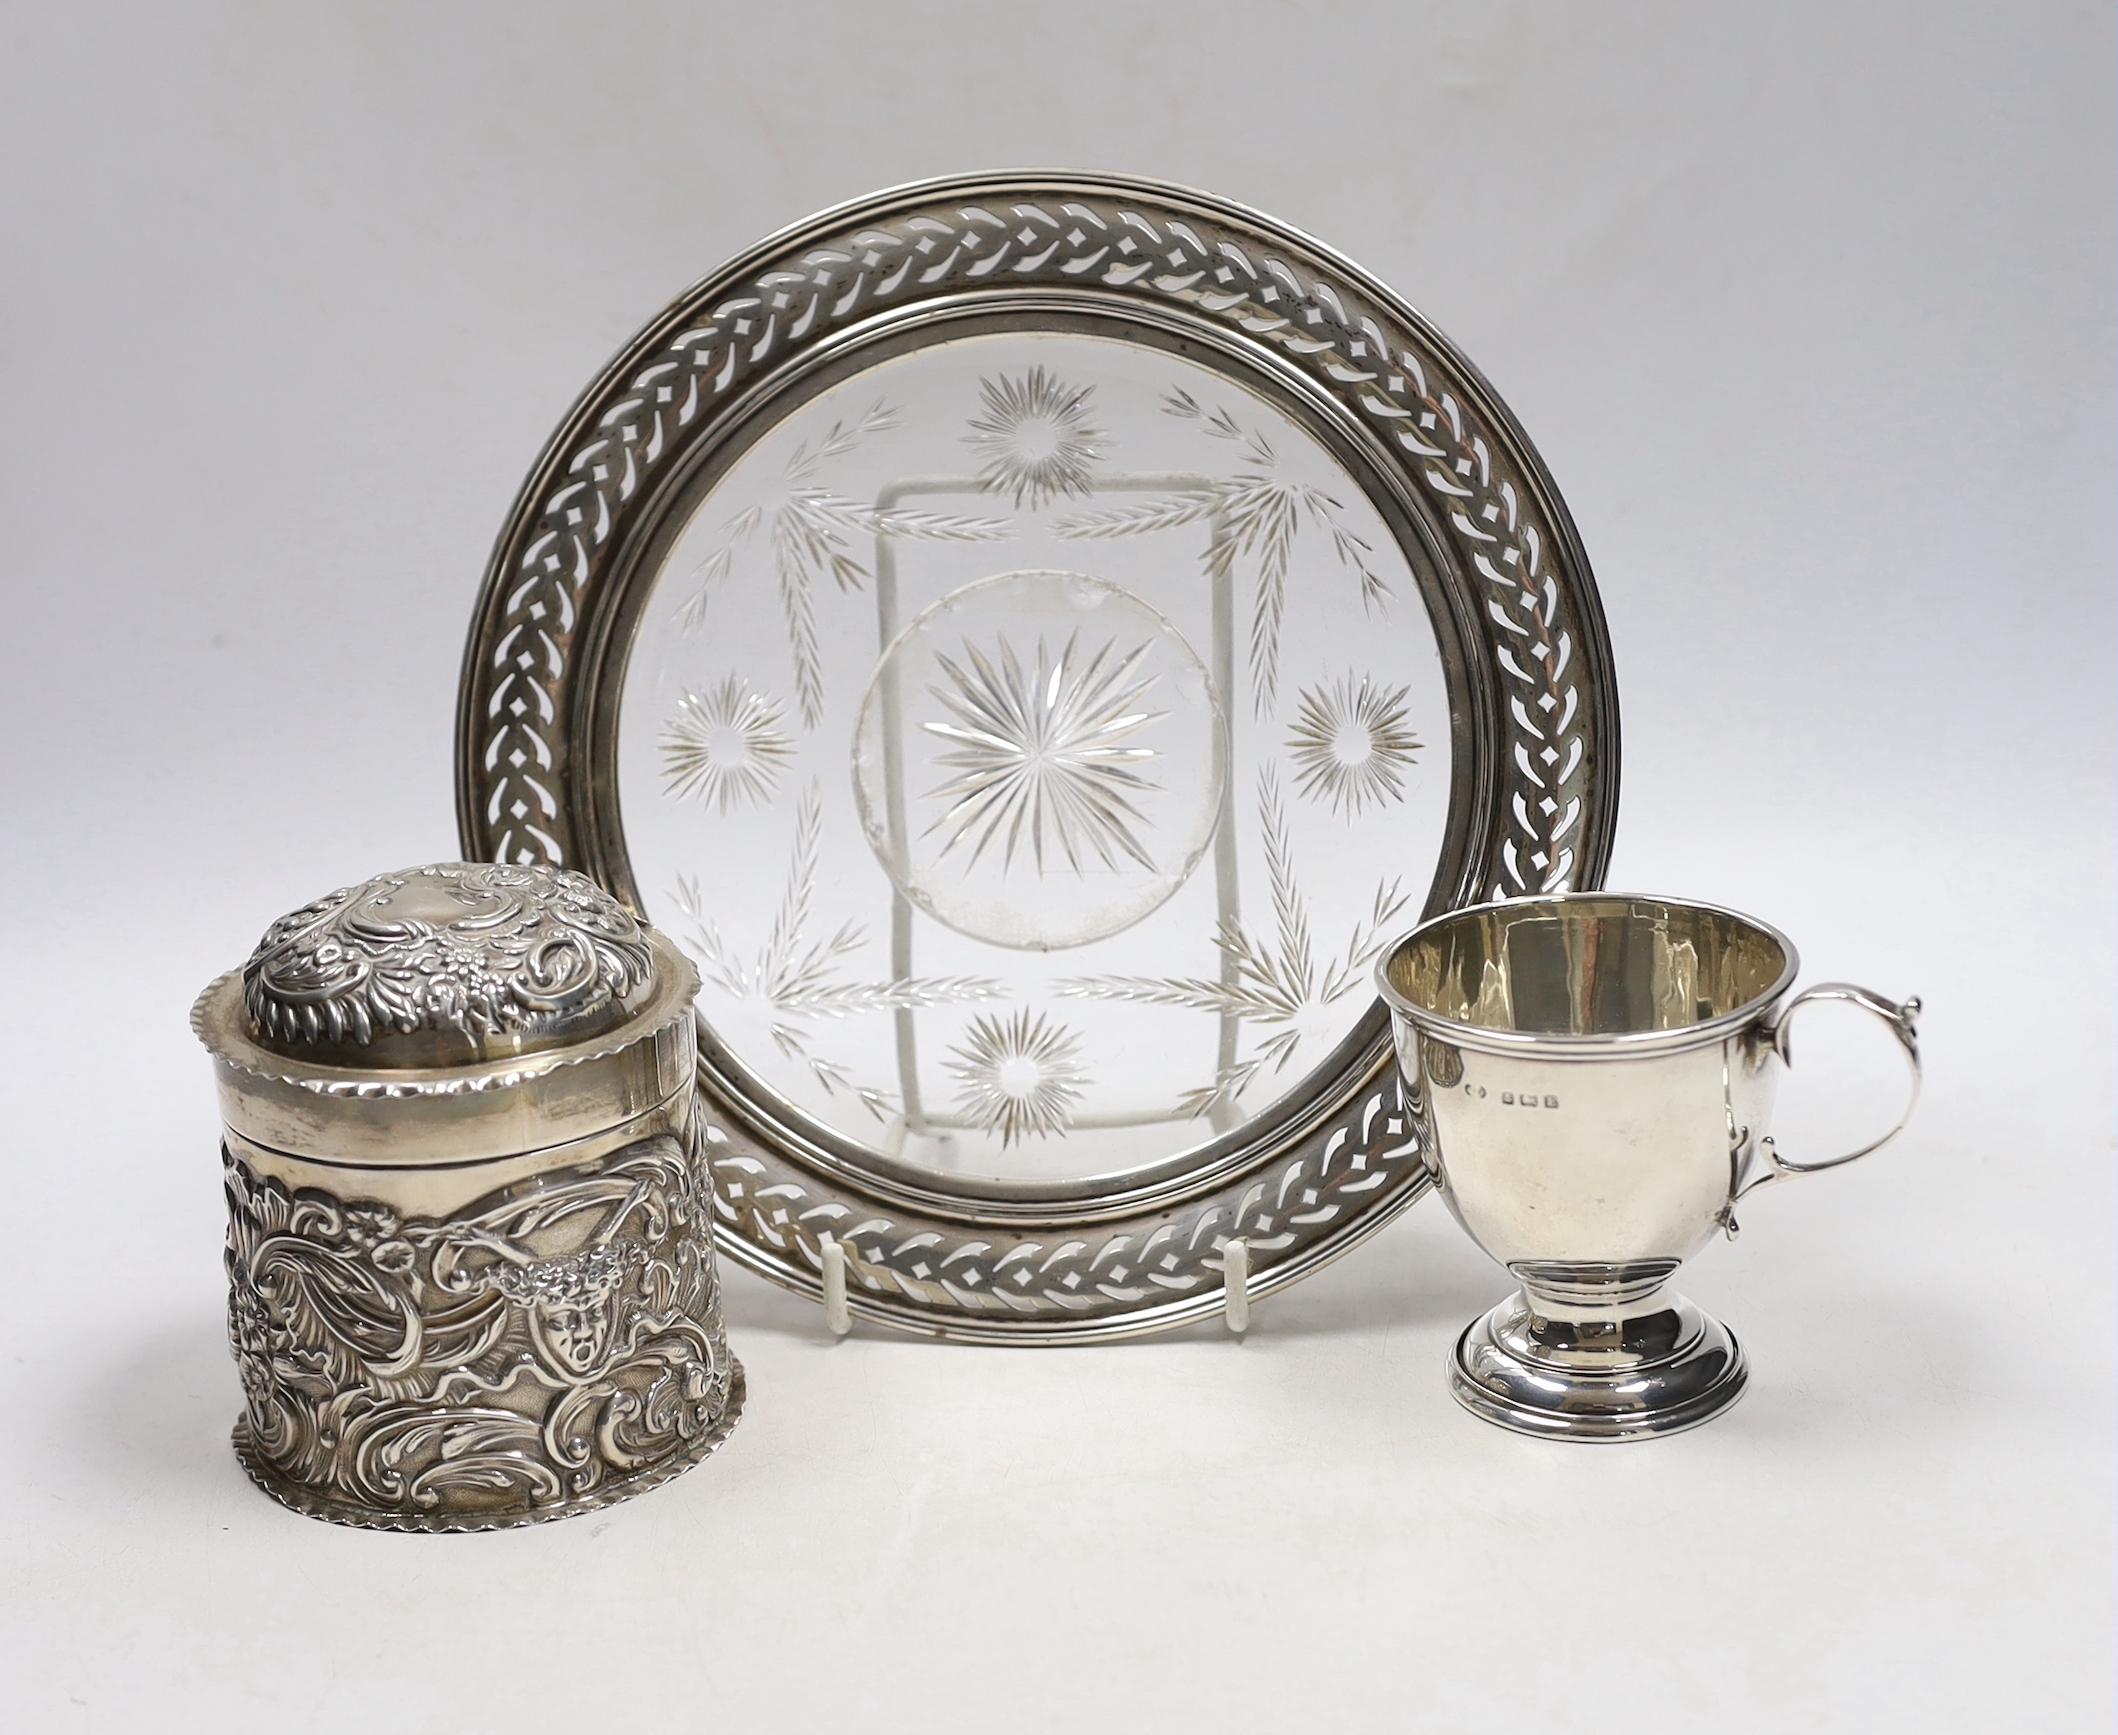 A late Victorian repousse silver cannister and cover, by William Comyns, London, 1896, 92mm a sterling mounted glass stand and a small silver cup.